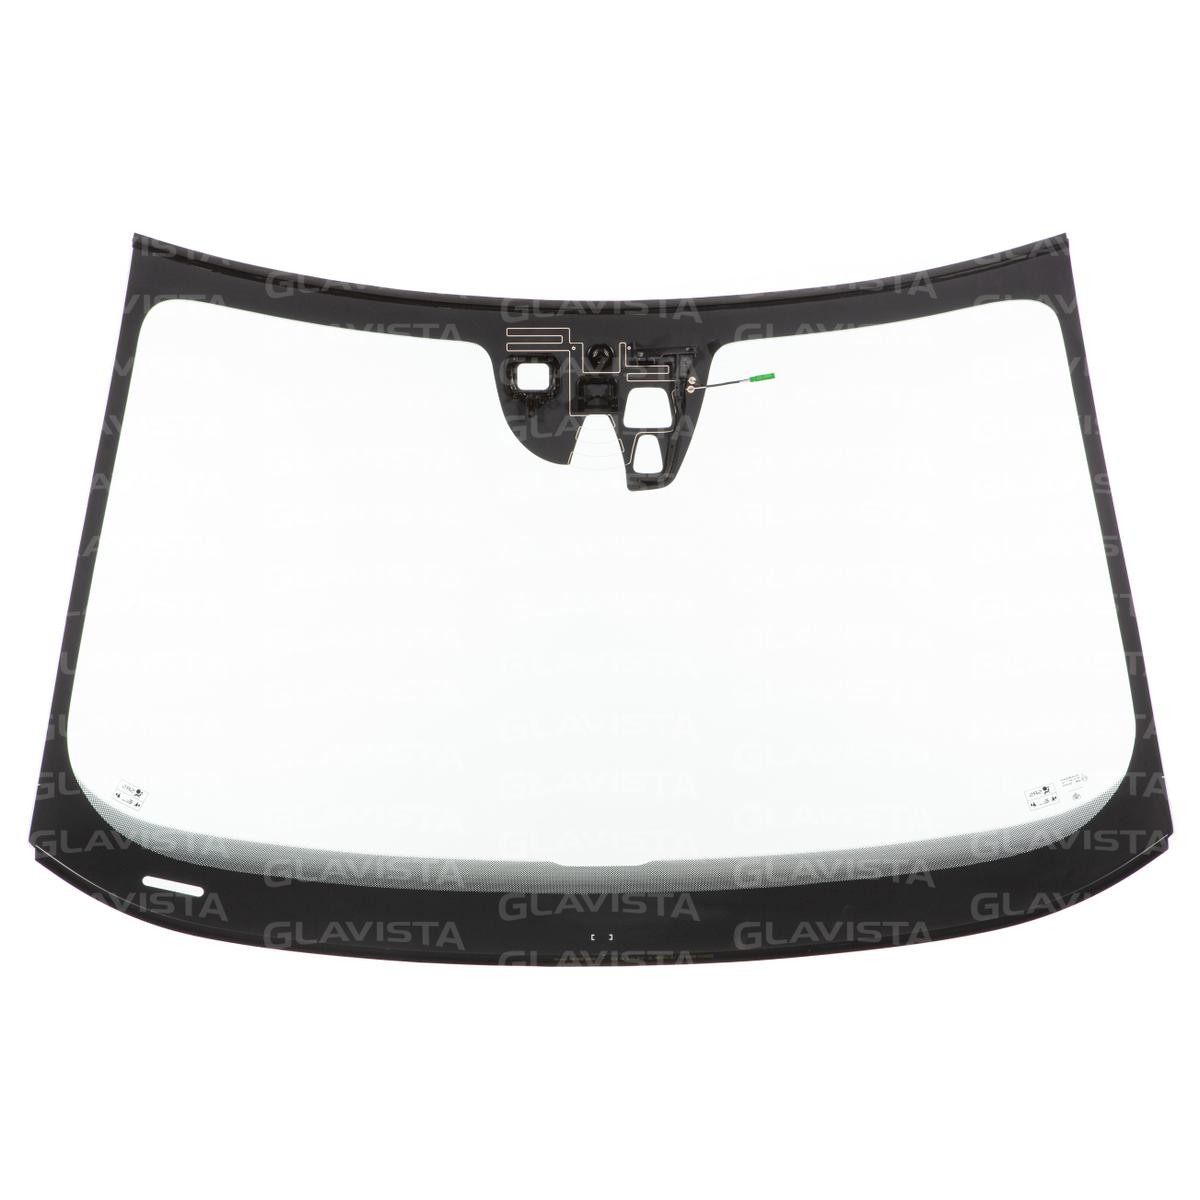 GLAVISTA Acoustic Glass (noise reduction), with mirror holder, with rain sensor arrangement, with light sensor arrangement, with camera (emergency brake assist), with sight window for vehicle identification number (VIN), with camera mount, green Windshield 101291 buy